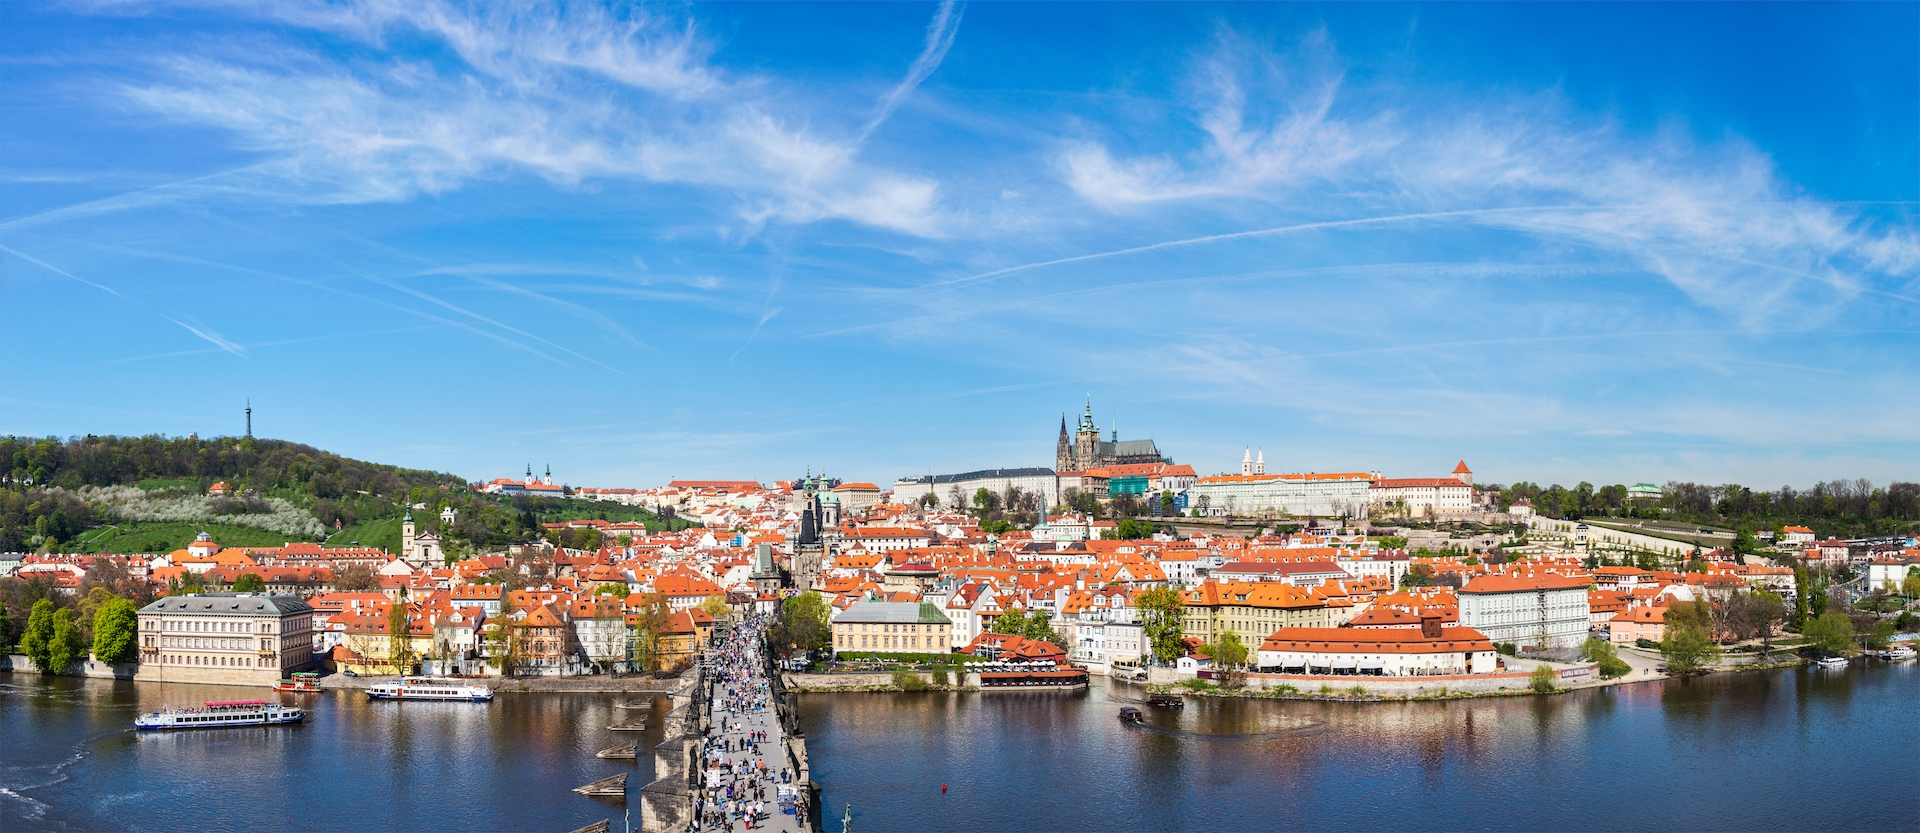 5 Ideal Cities to Visit in Eastern Europe